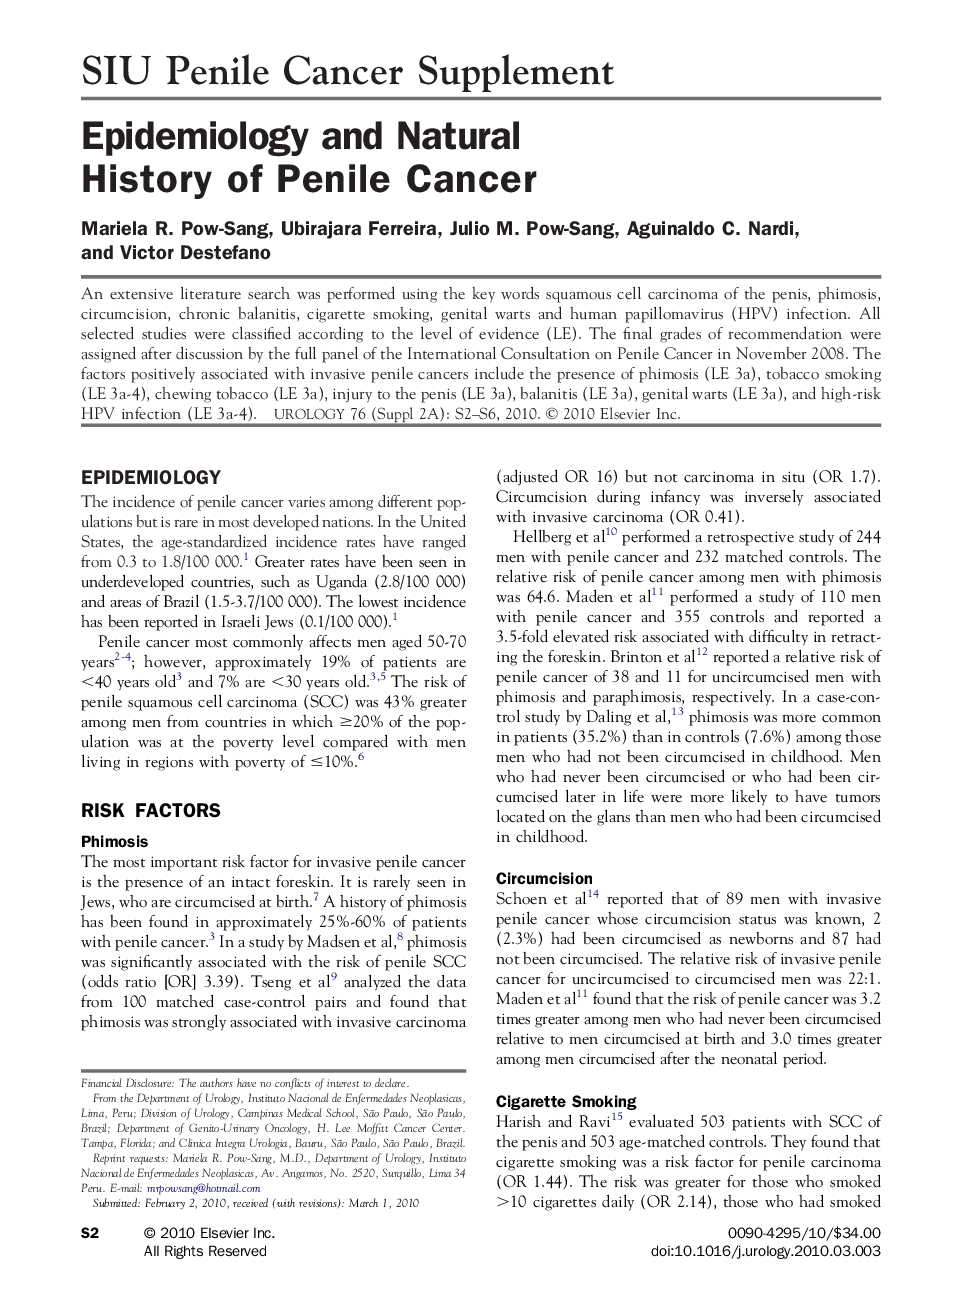 Epidemiology and Natural History of Penile Cancer 